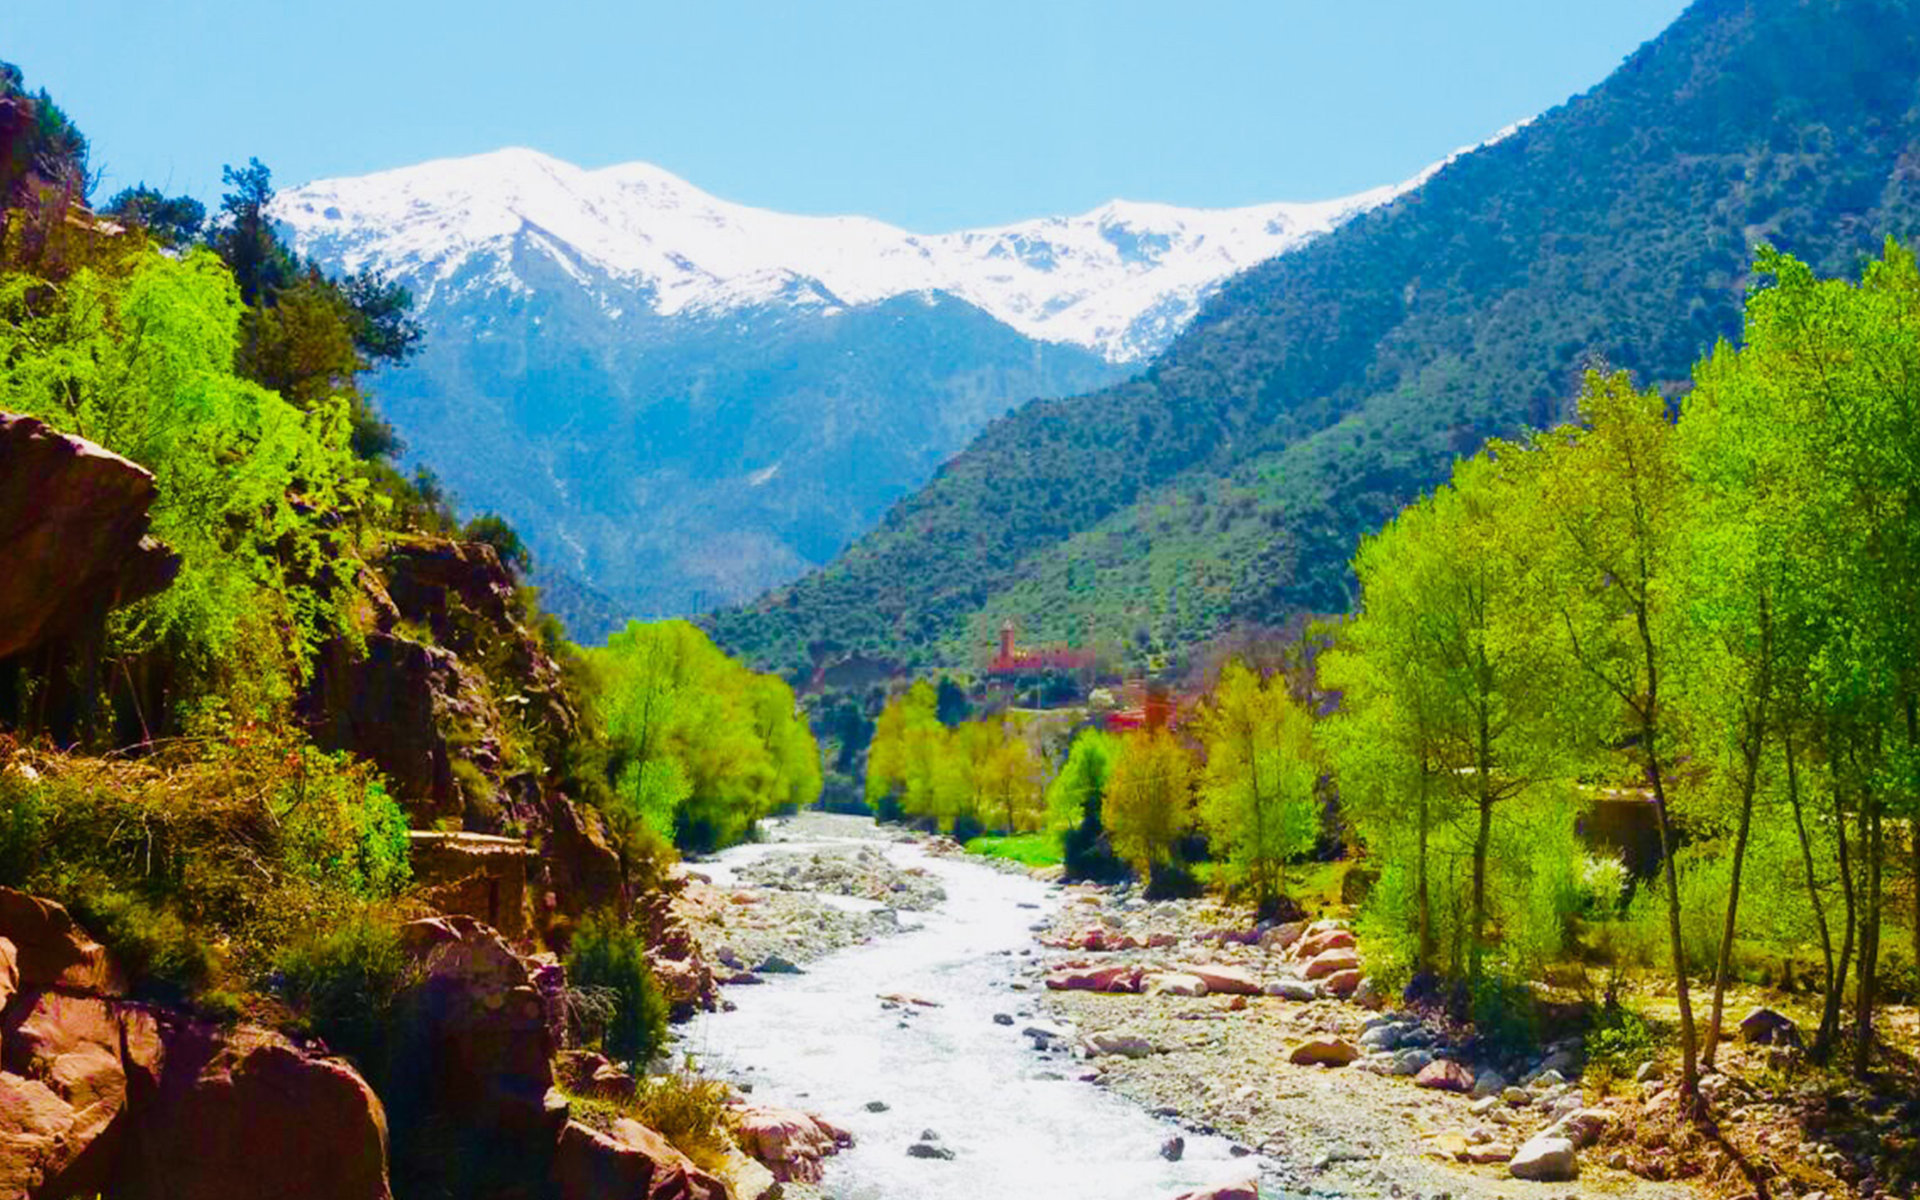 Full day trip from Marrakech to Ourika Valley